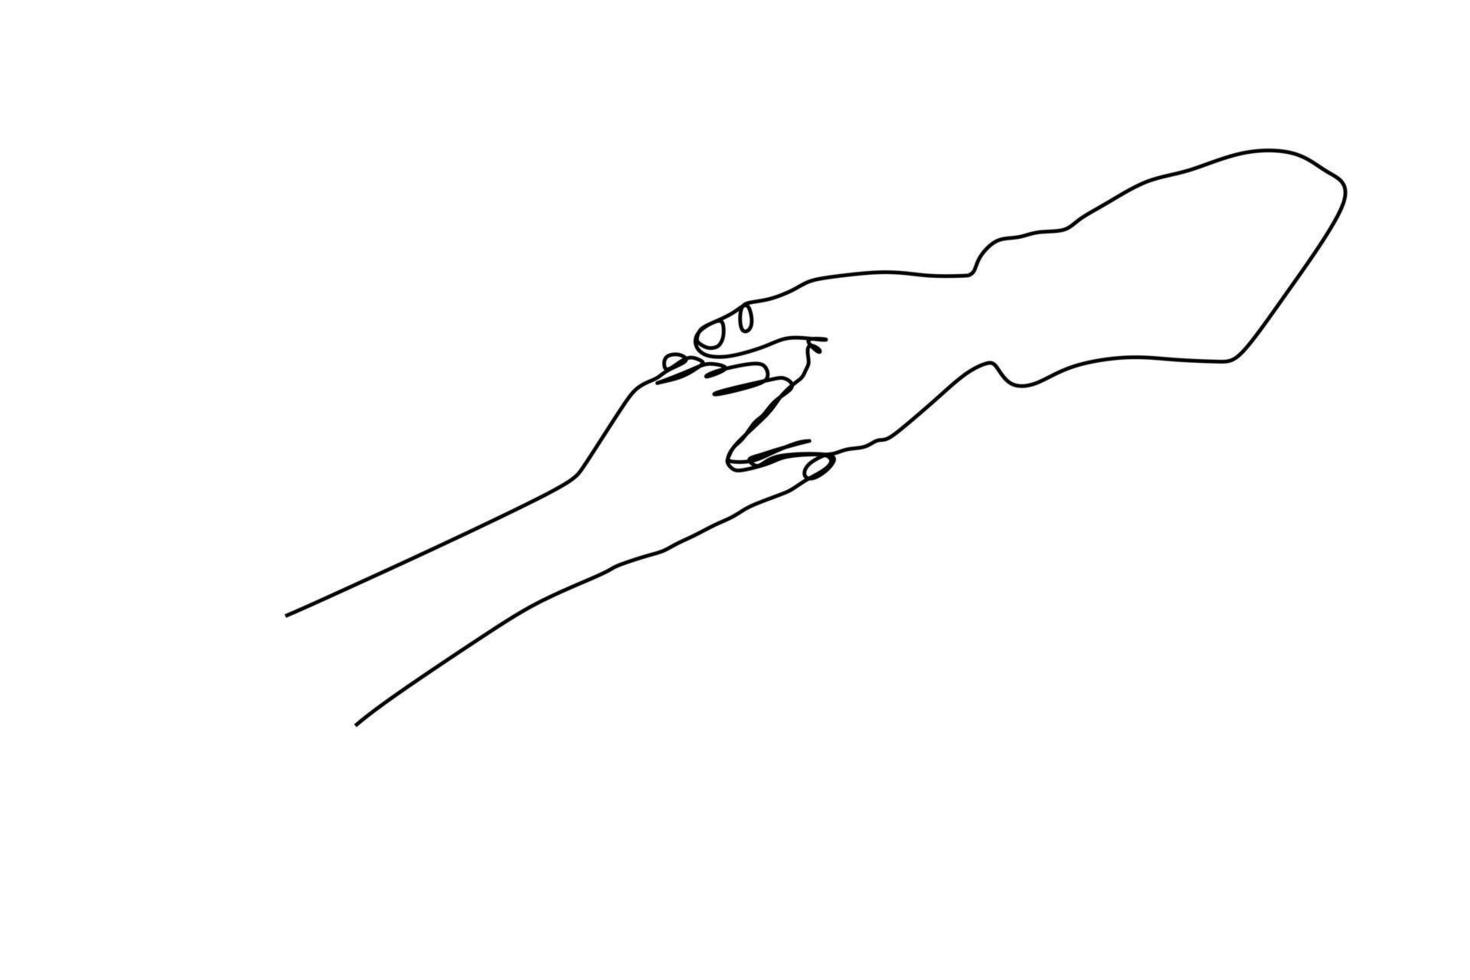 Hands holding gesture. Single continuous line hand gesture graphic icon. Simple one line draw doodle for world campaign concept. Isolated vector illustration minimalist design on white background